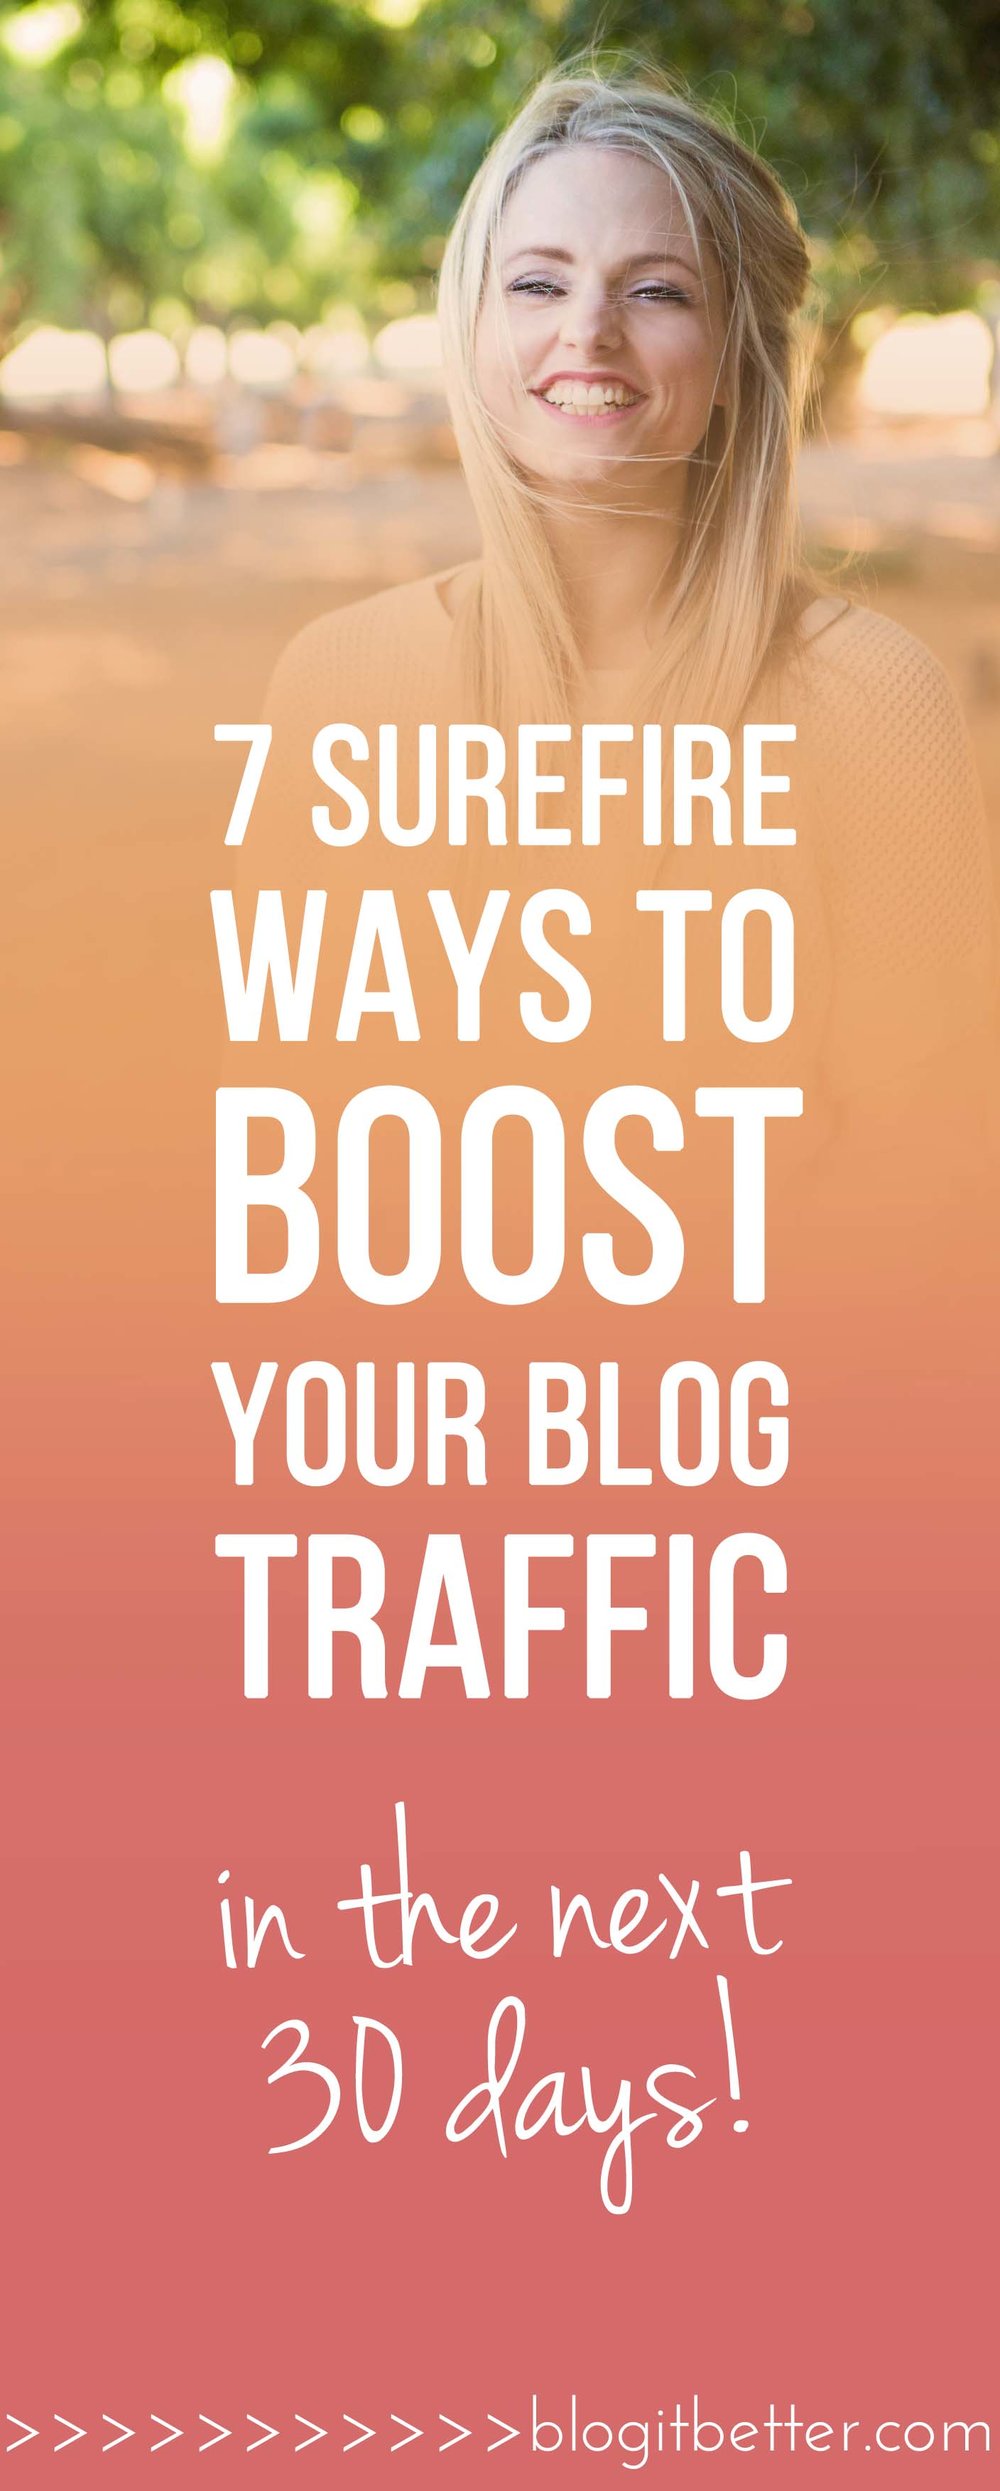 Want More Blog Traffic? Then You Need To Action These 7 Surefire Traffic Boosters! 